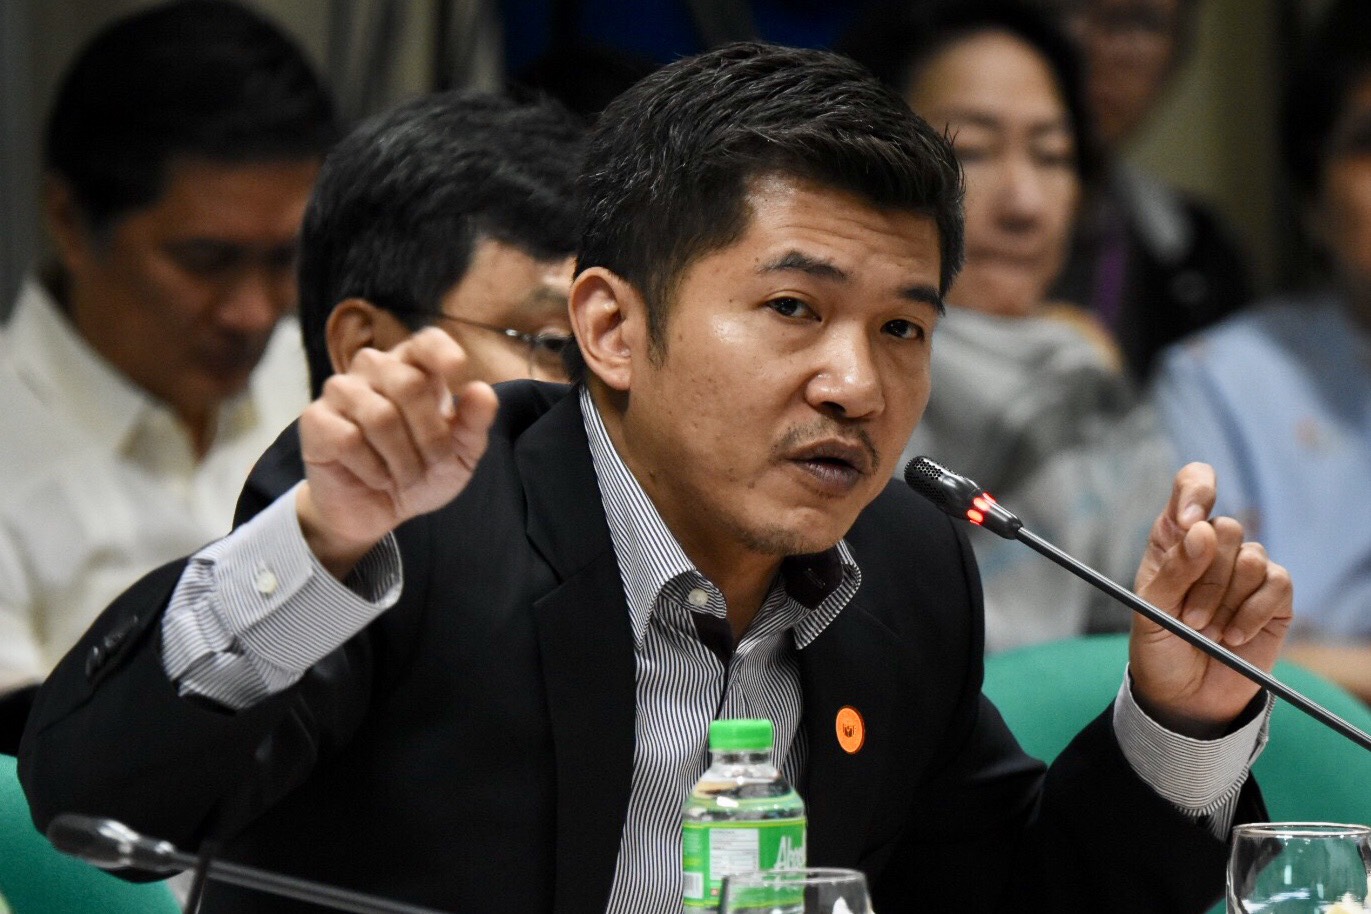 NOT PART OF MARCOS TEAM. Lawyer and ex-Biliran representative Glenn Chong gestures during a Senate hearing on July 31, 2018. File photo by Angie de Silva/Rappler 